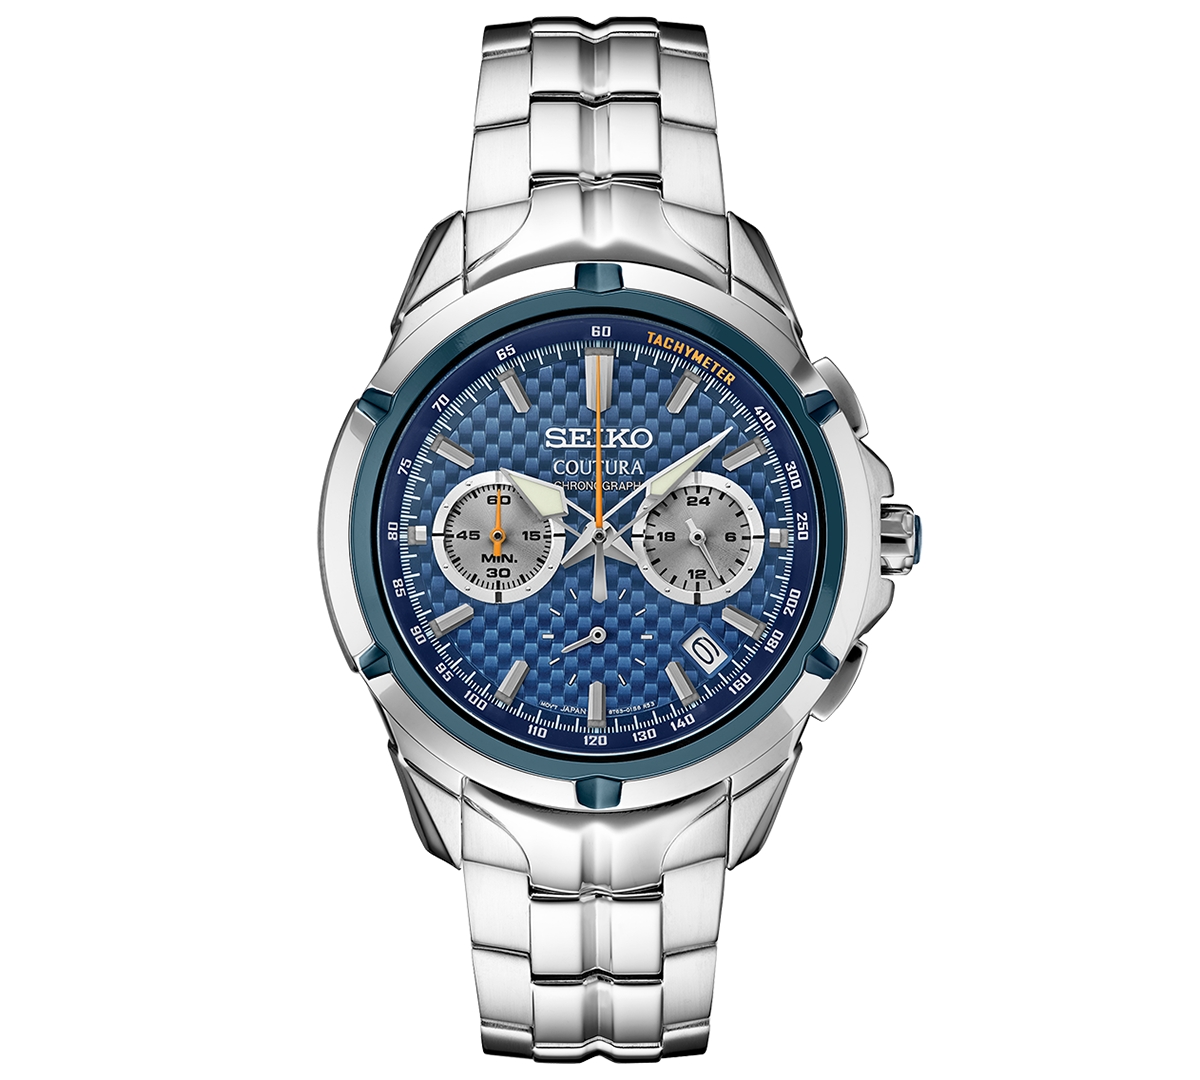 Men's Chronograph Coutura Stainless Steel Bracelet Watch 42mm - Blue